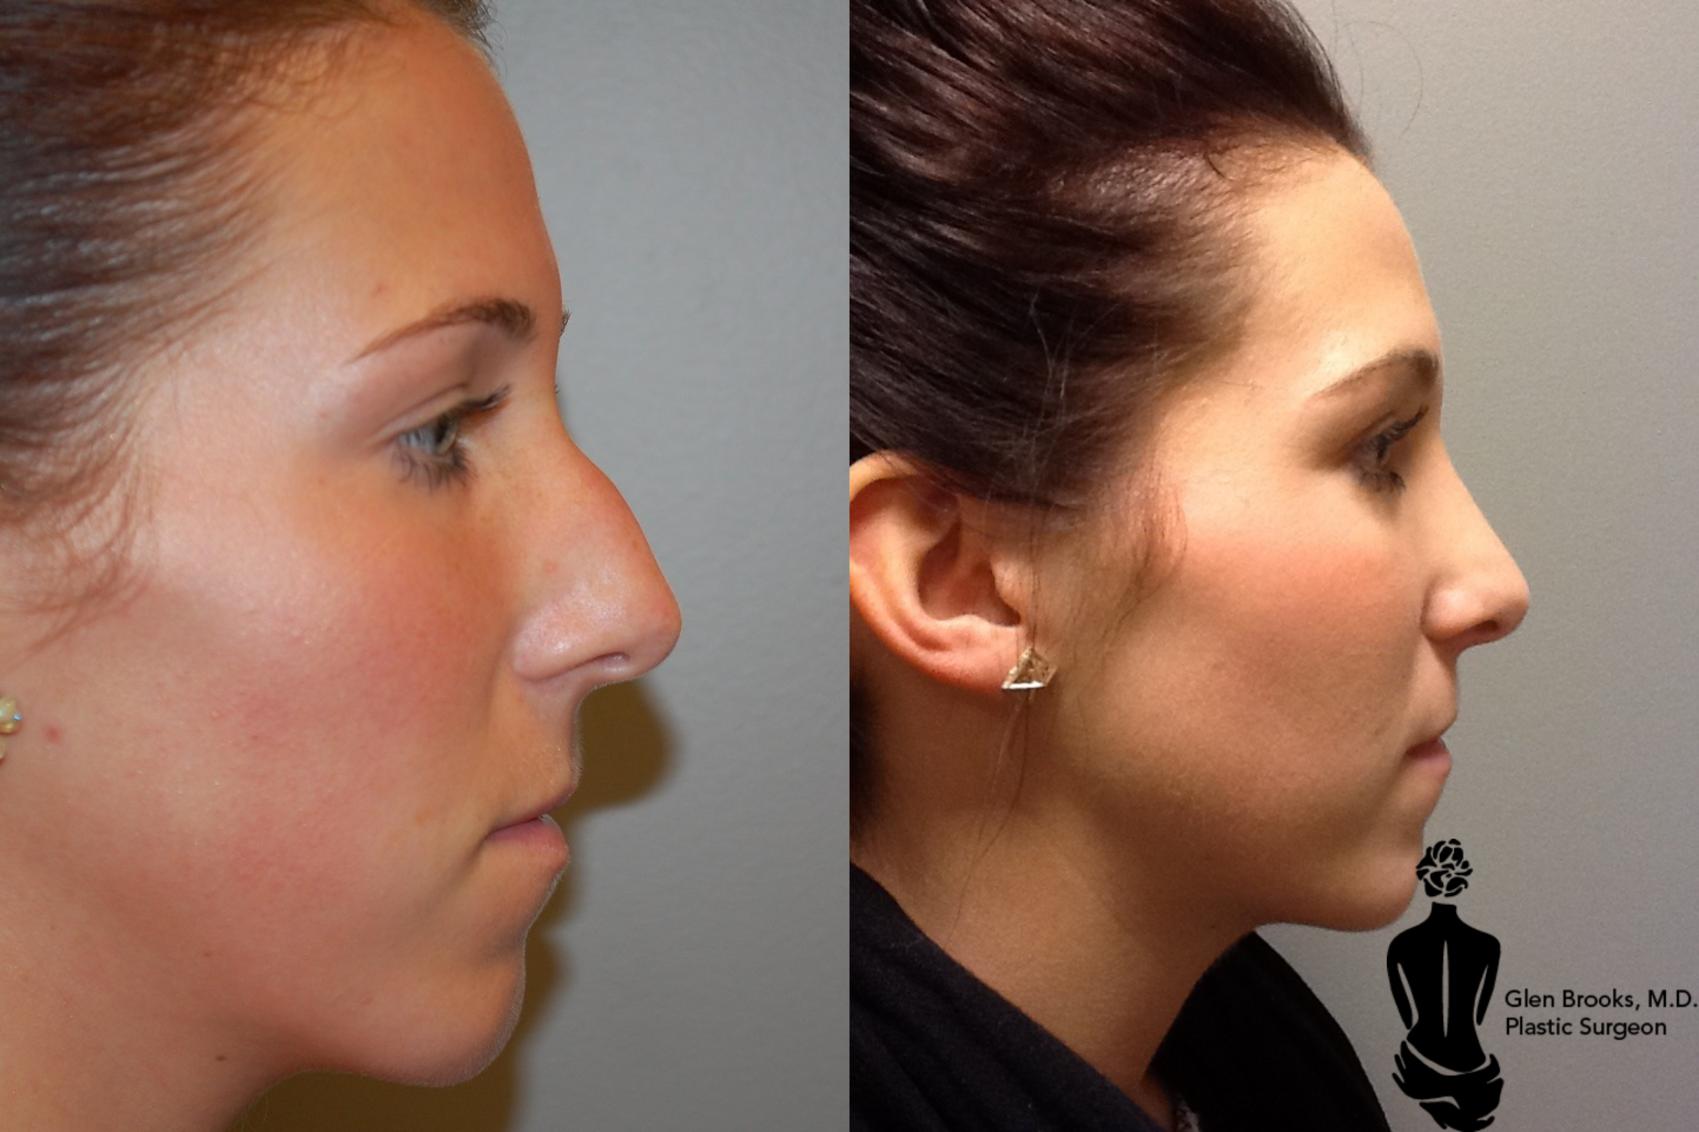 Rhinoplasty Before & After Photo | Springfield, MA | Aesthetic Plastic & Reconstructive Surgery